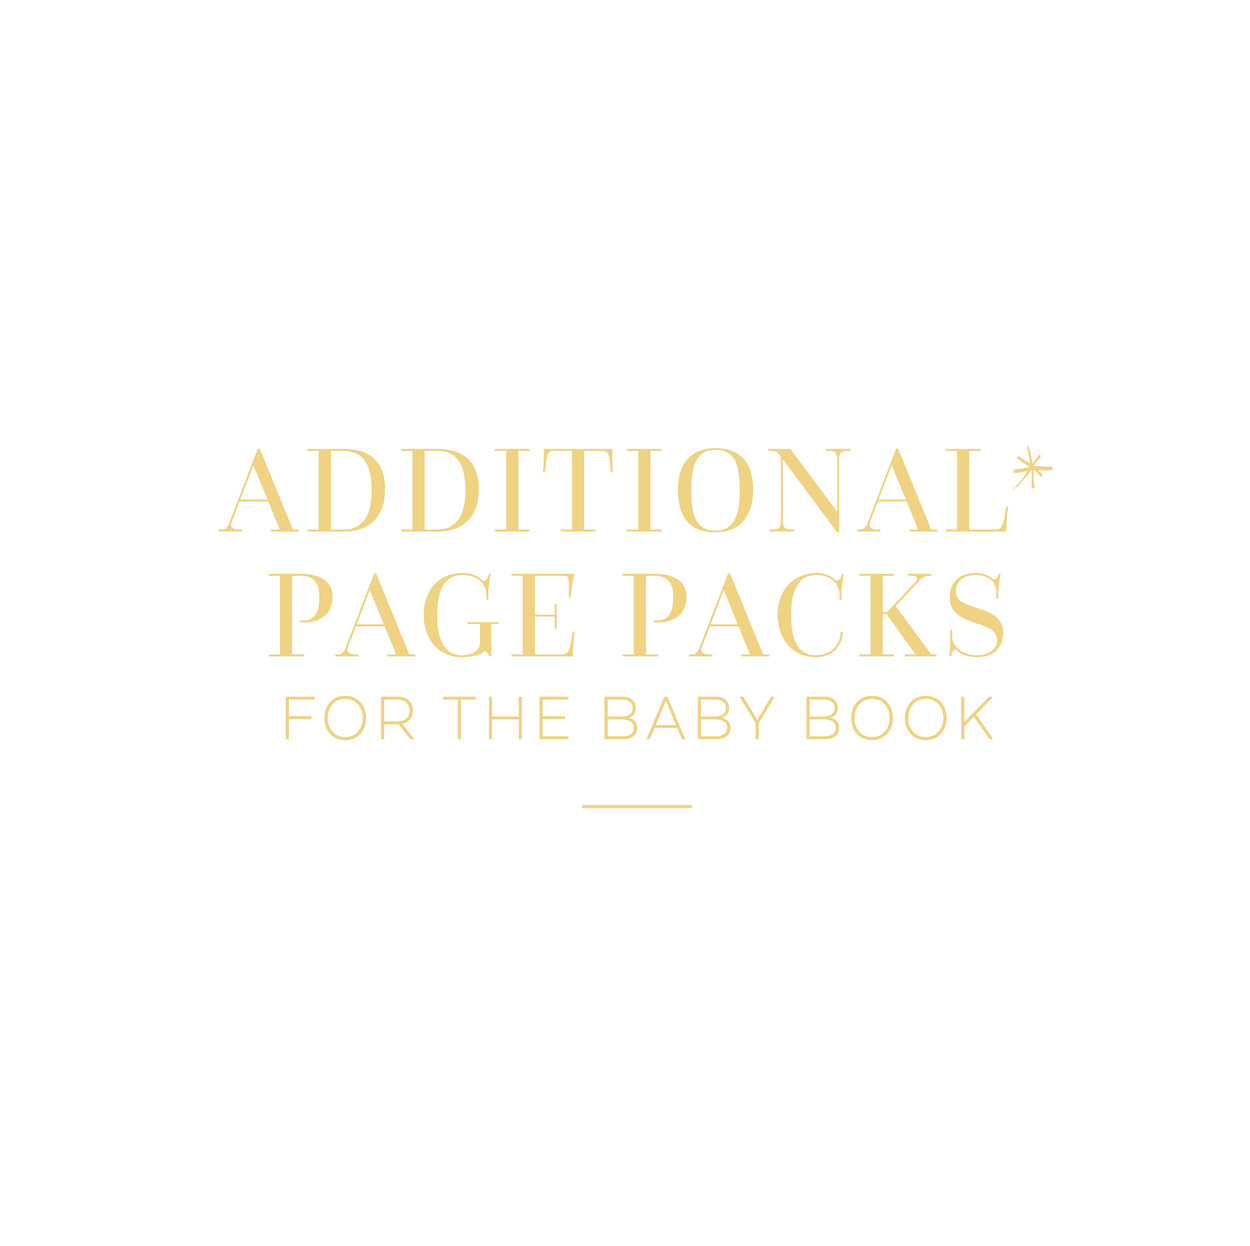 Additional Page Packs for the Baby Book